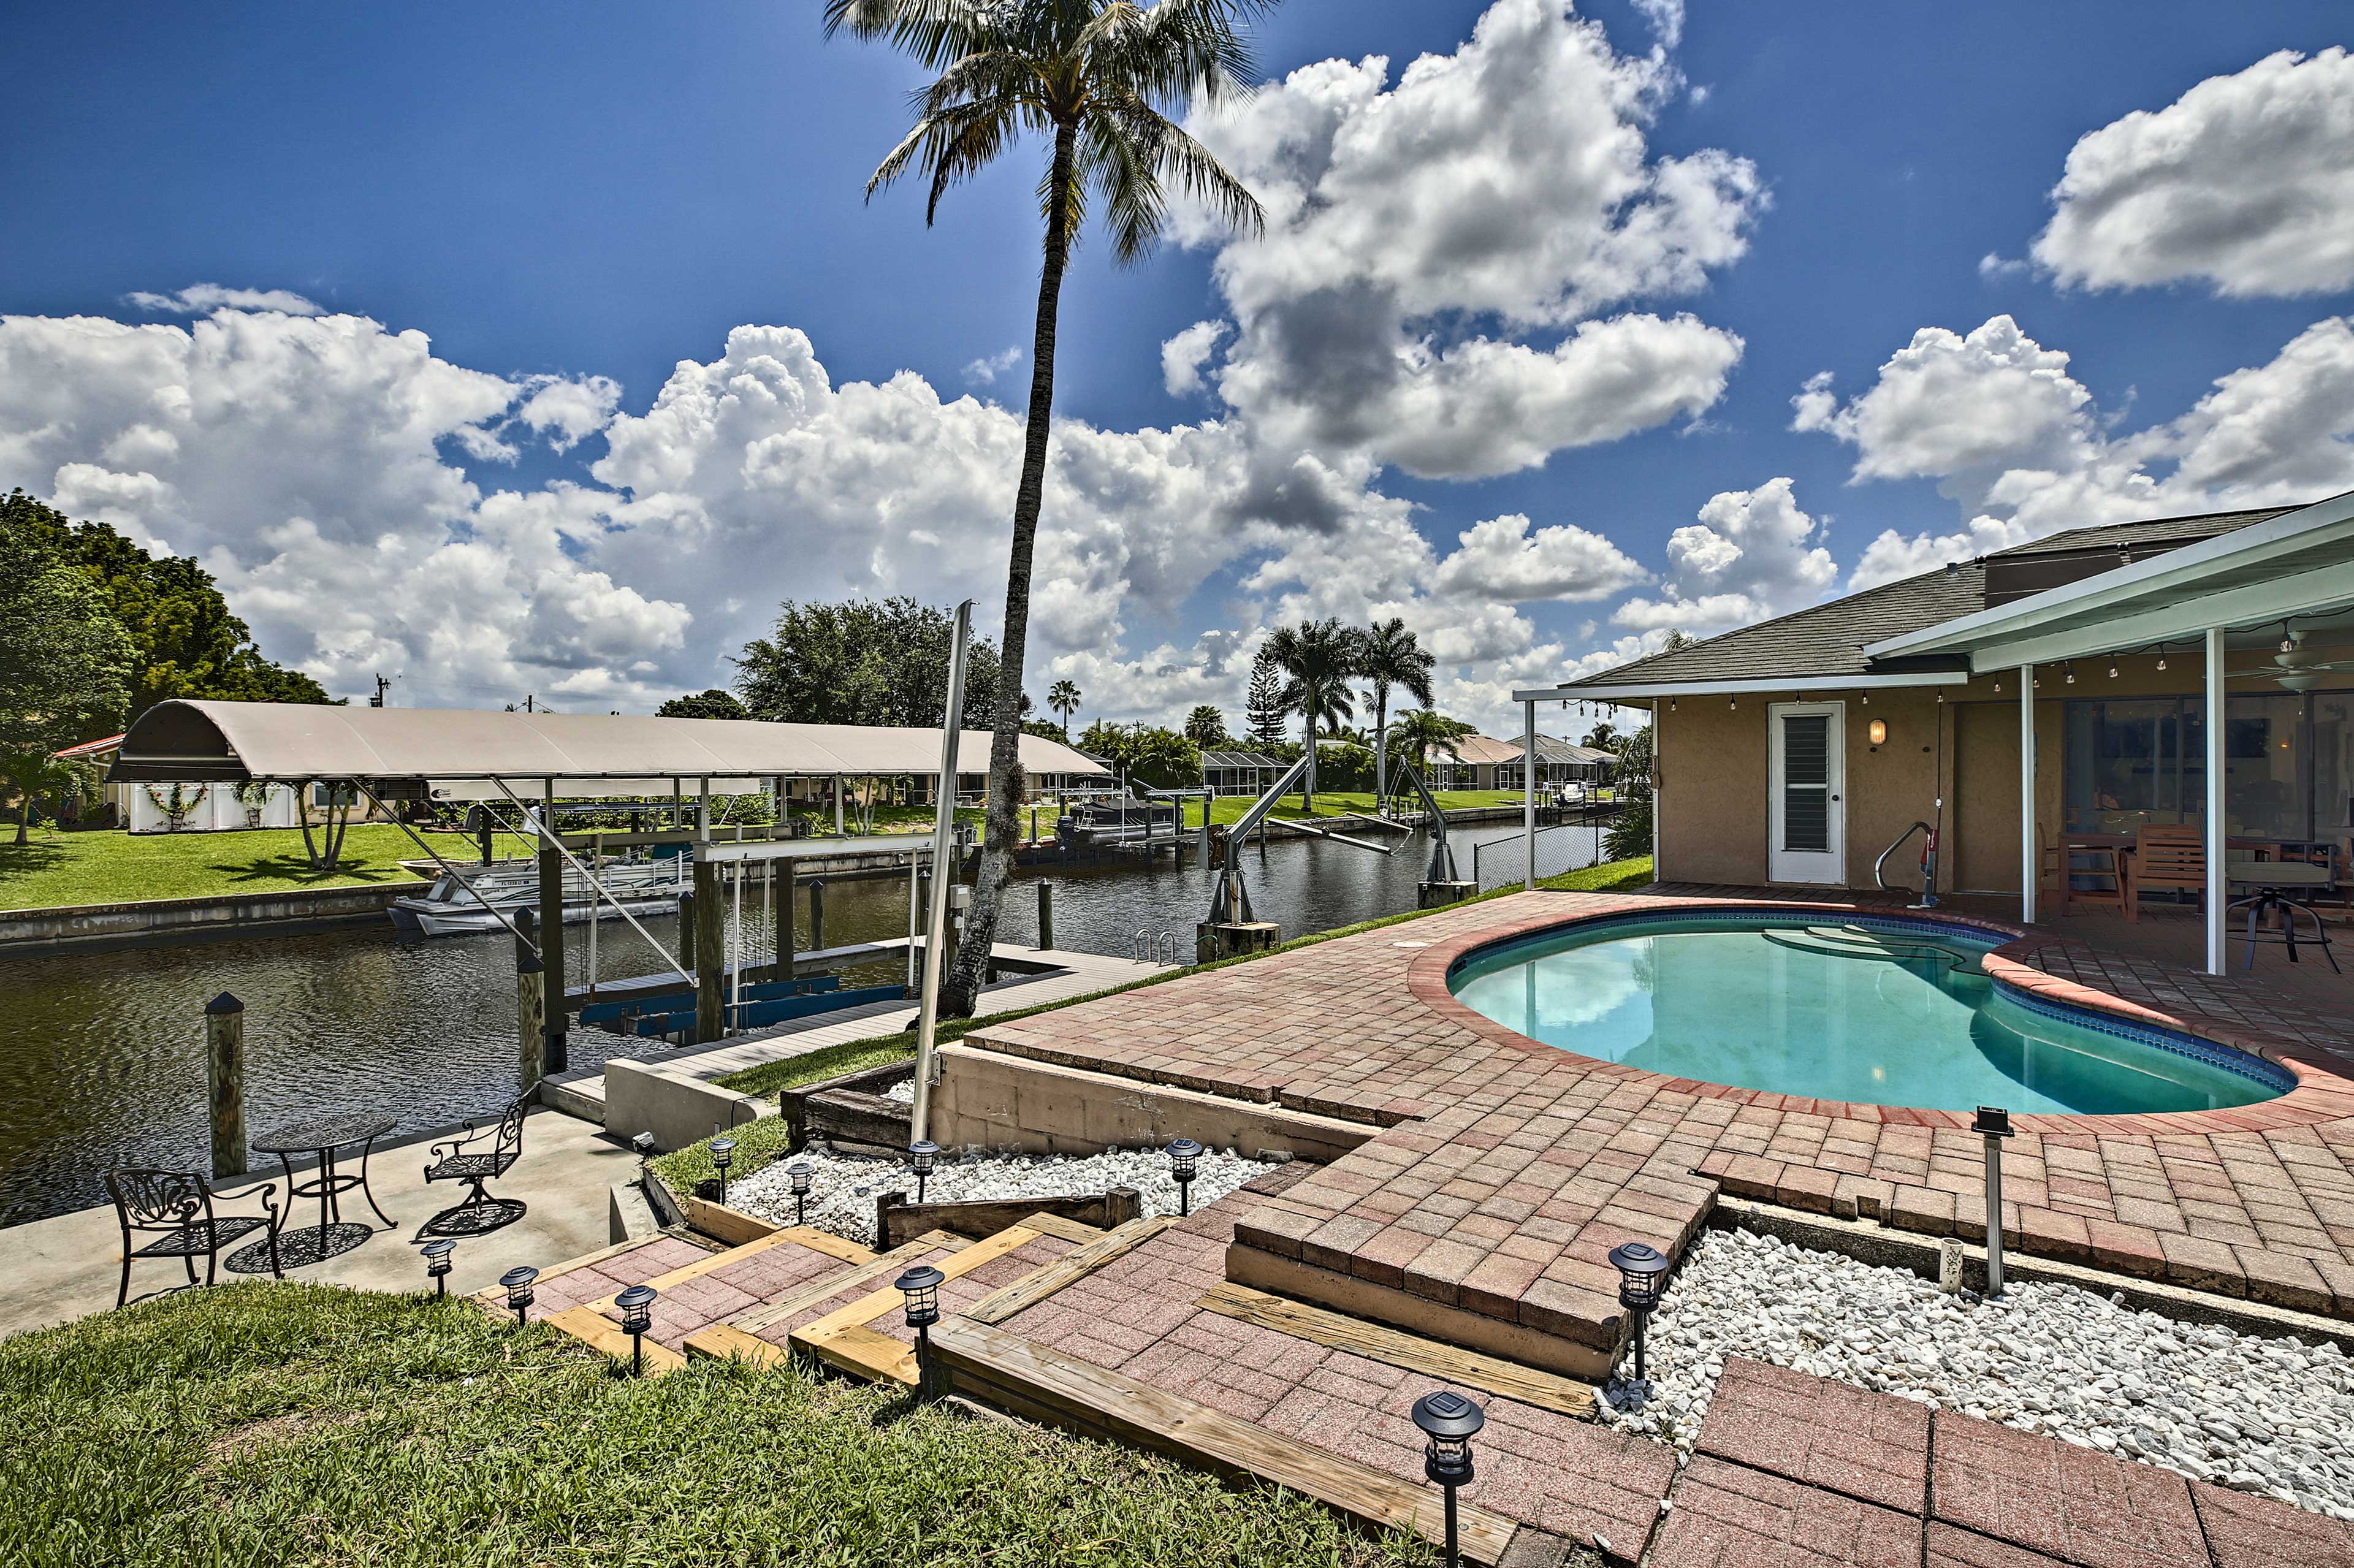 Property Image 2 - Canalfront Oasis with BBQ, Patio, Kayaks & Dock!